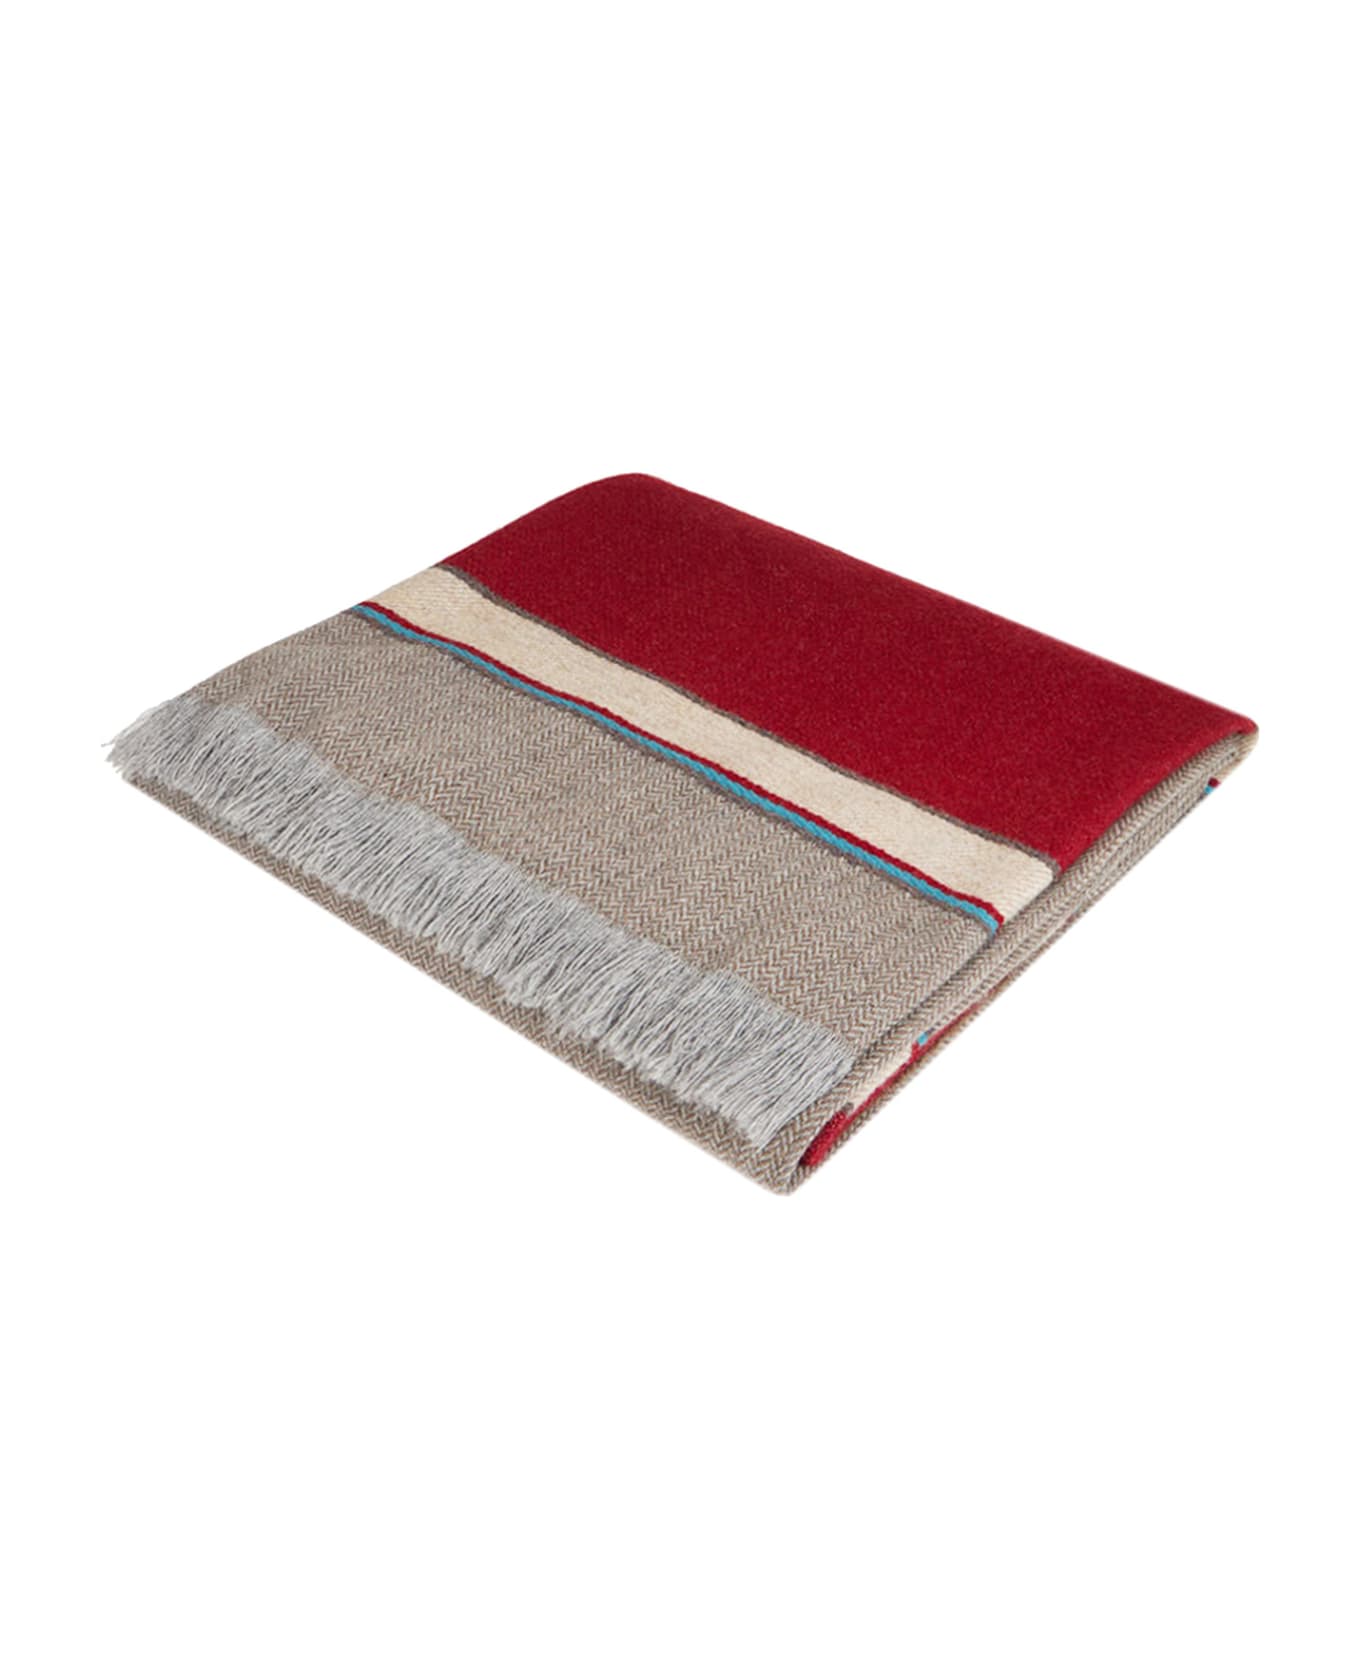 Etro Small Blanket - Red